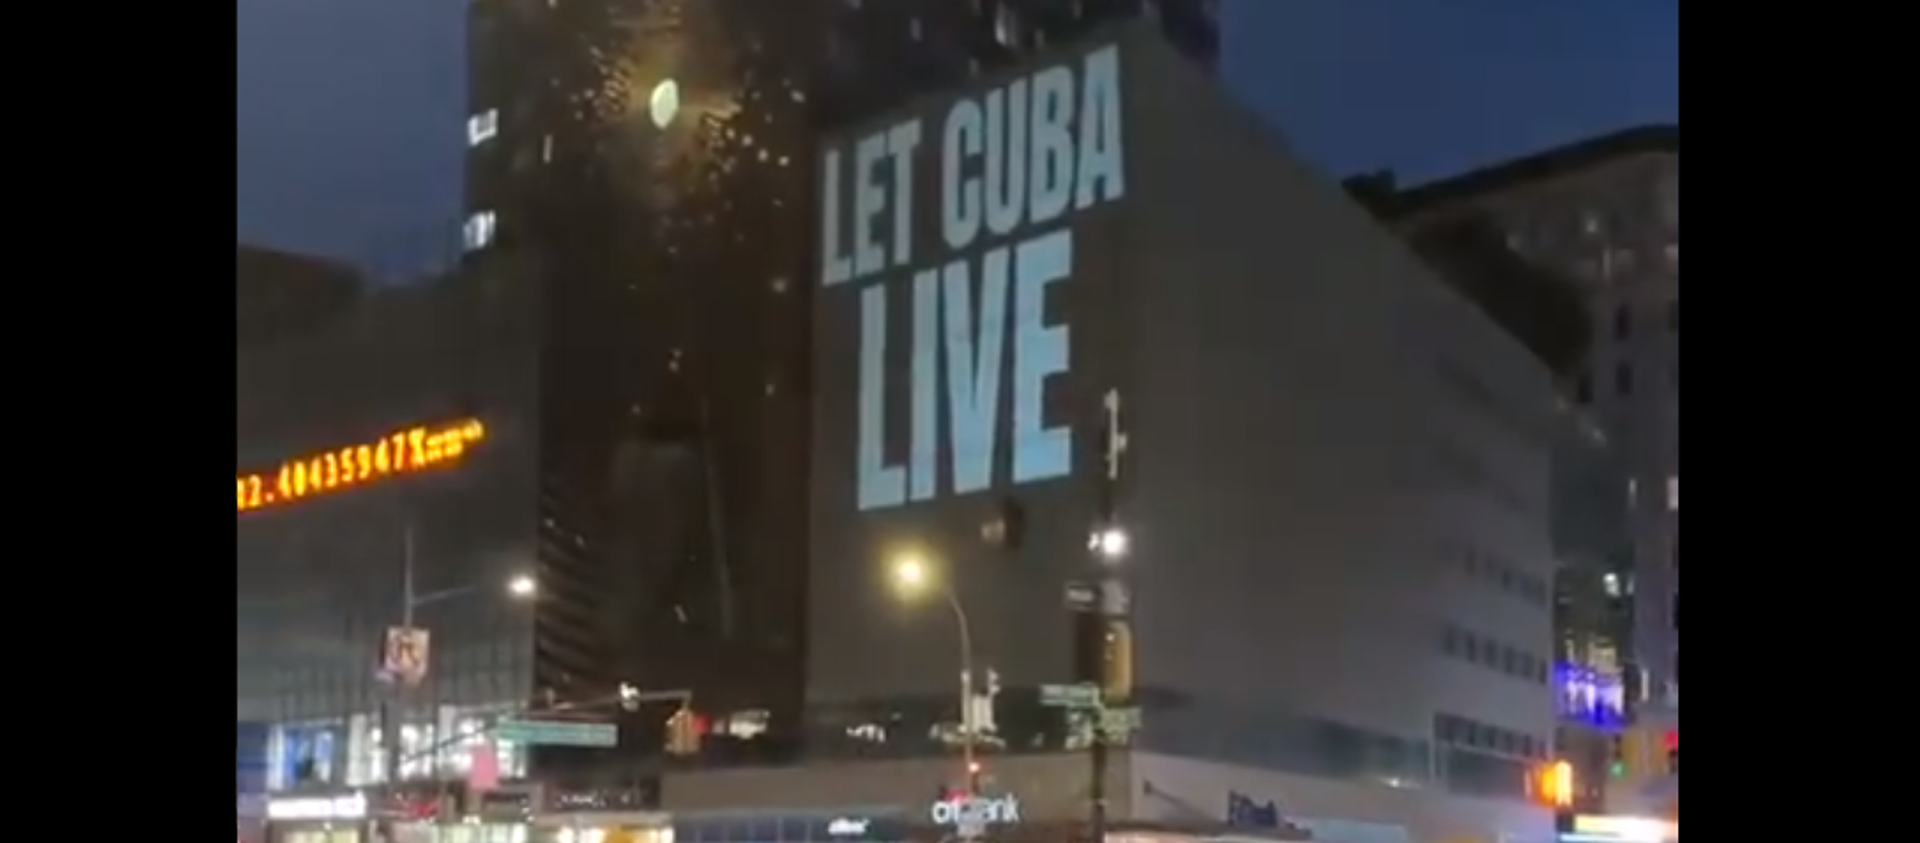 A projection in Times Square on 22 July 2021, organised by The People's Forum in New York in conjunction with the publication of a letter calling for US President Joe Biden to drop the 243 sanctions on Cuba introduced by Donald Trump. - Sputnik International, 1920, 23.07.2021